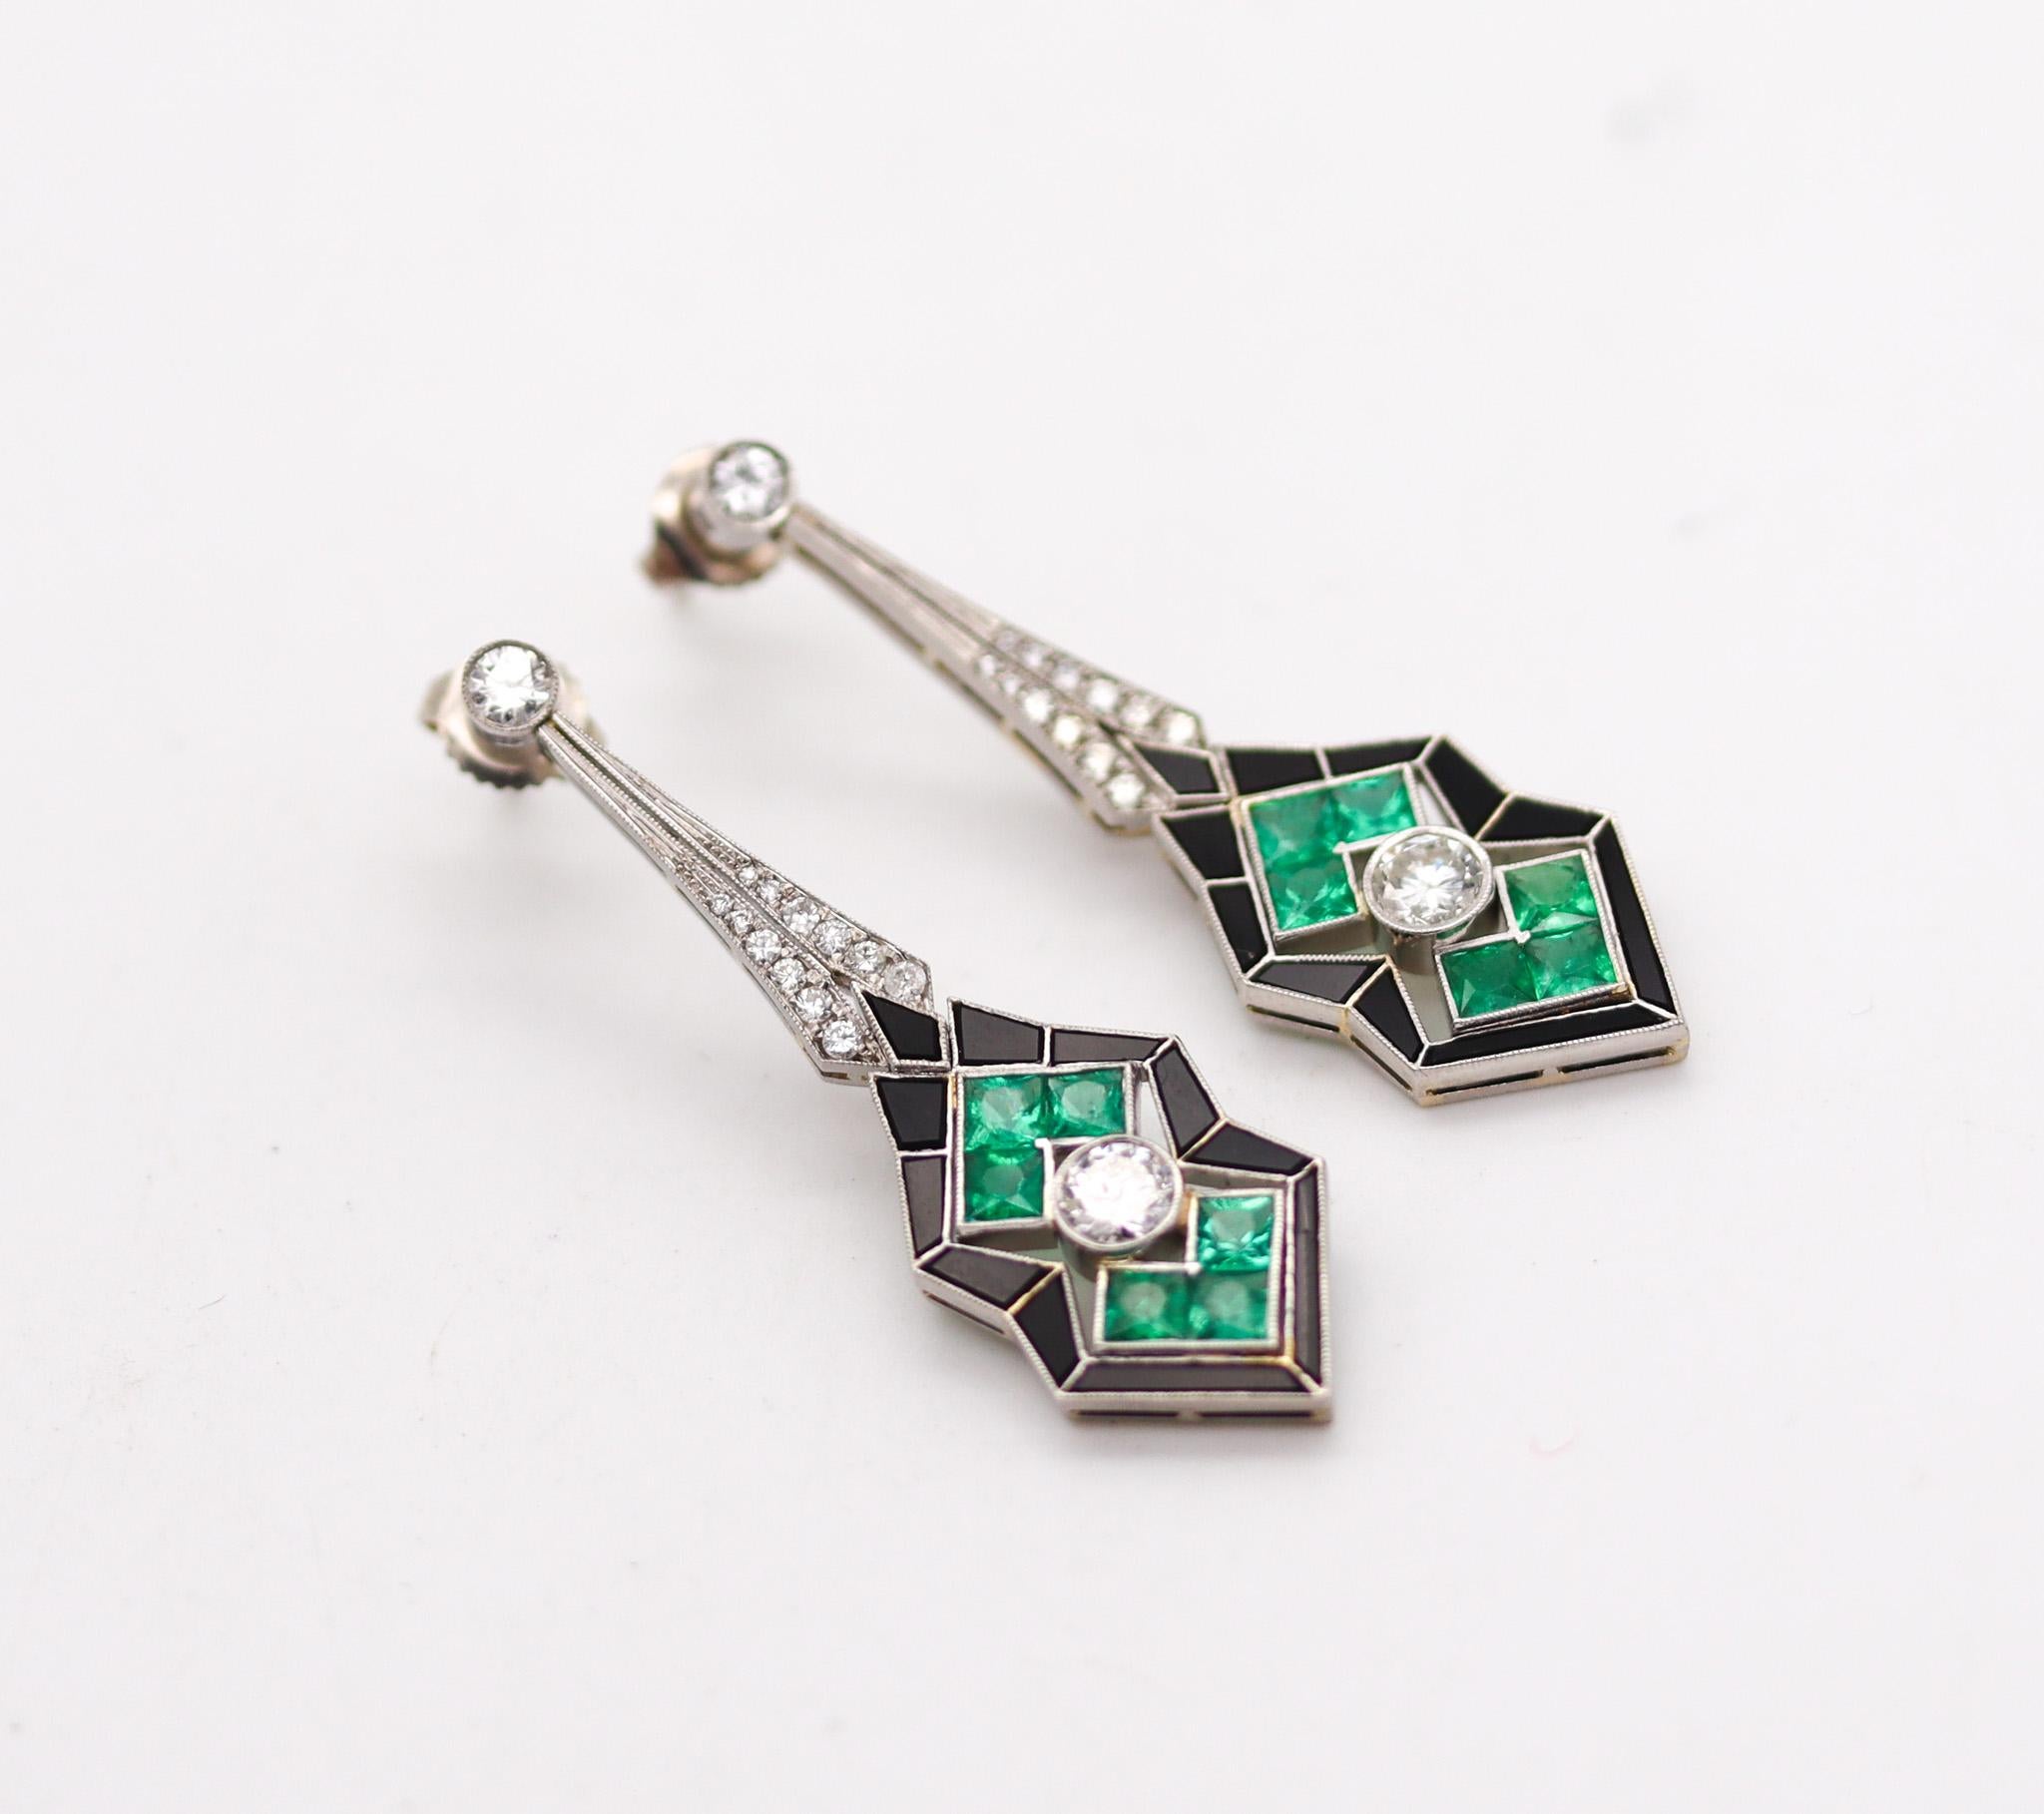 Round Cut Art Deco 1930 Dangle Earrings In Platinum With 10.52 Ctw In Diamonds & Emeralds For Sale